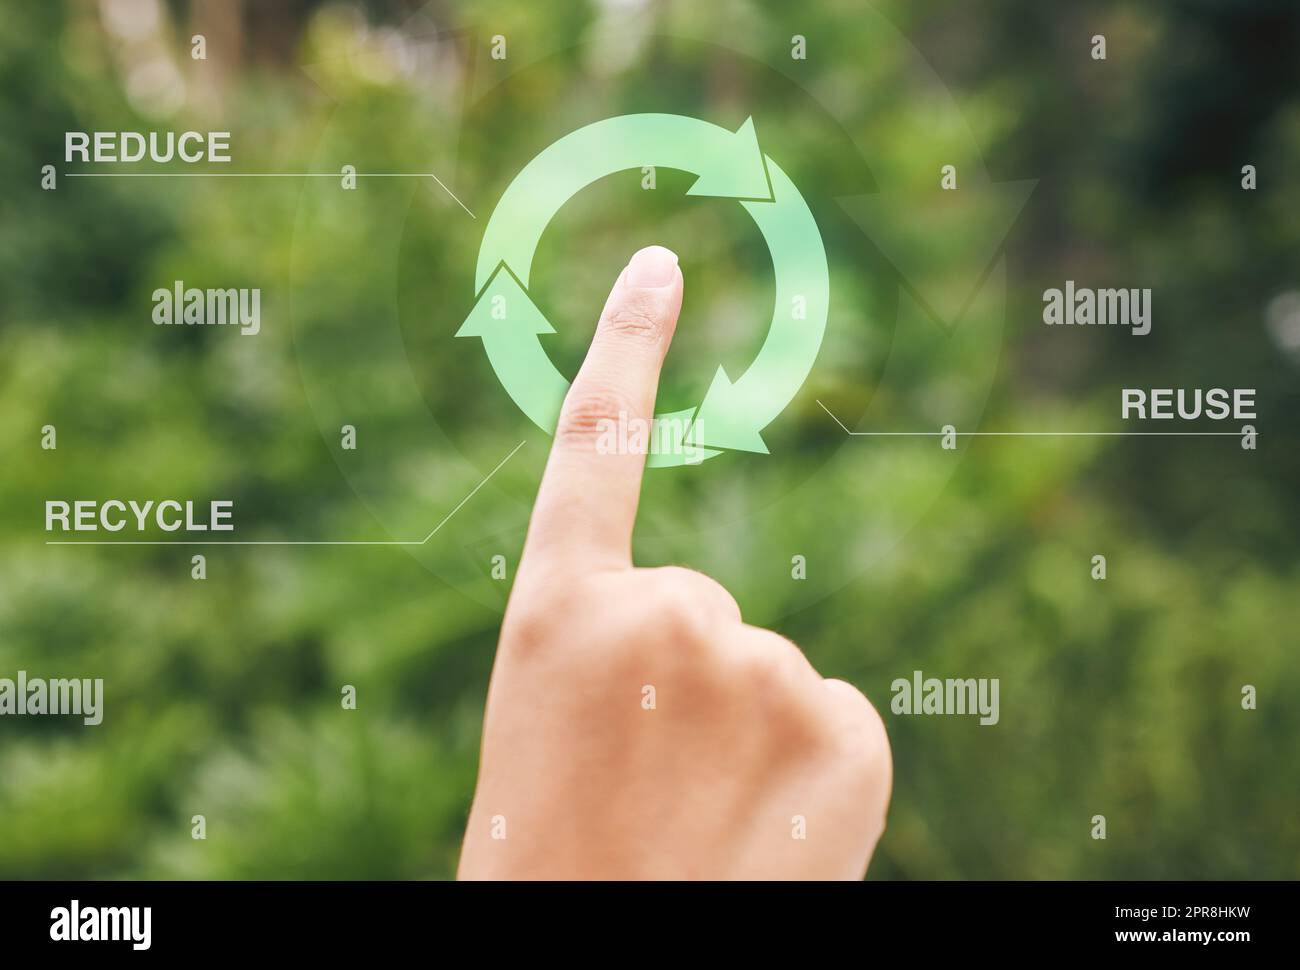 Finger selecting a digital recycle symbol. A digital recycling button being pressed by a person. Using technology to recycle, reuse and reduce waste. Stock Photo